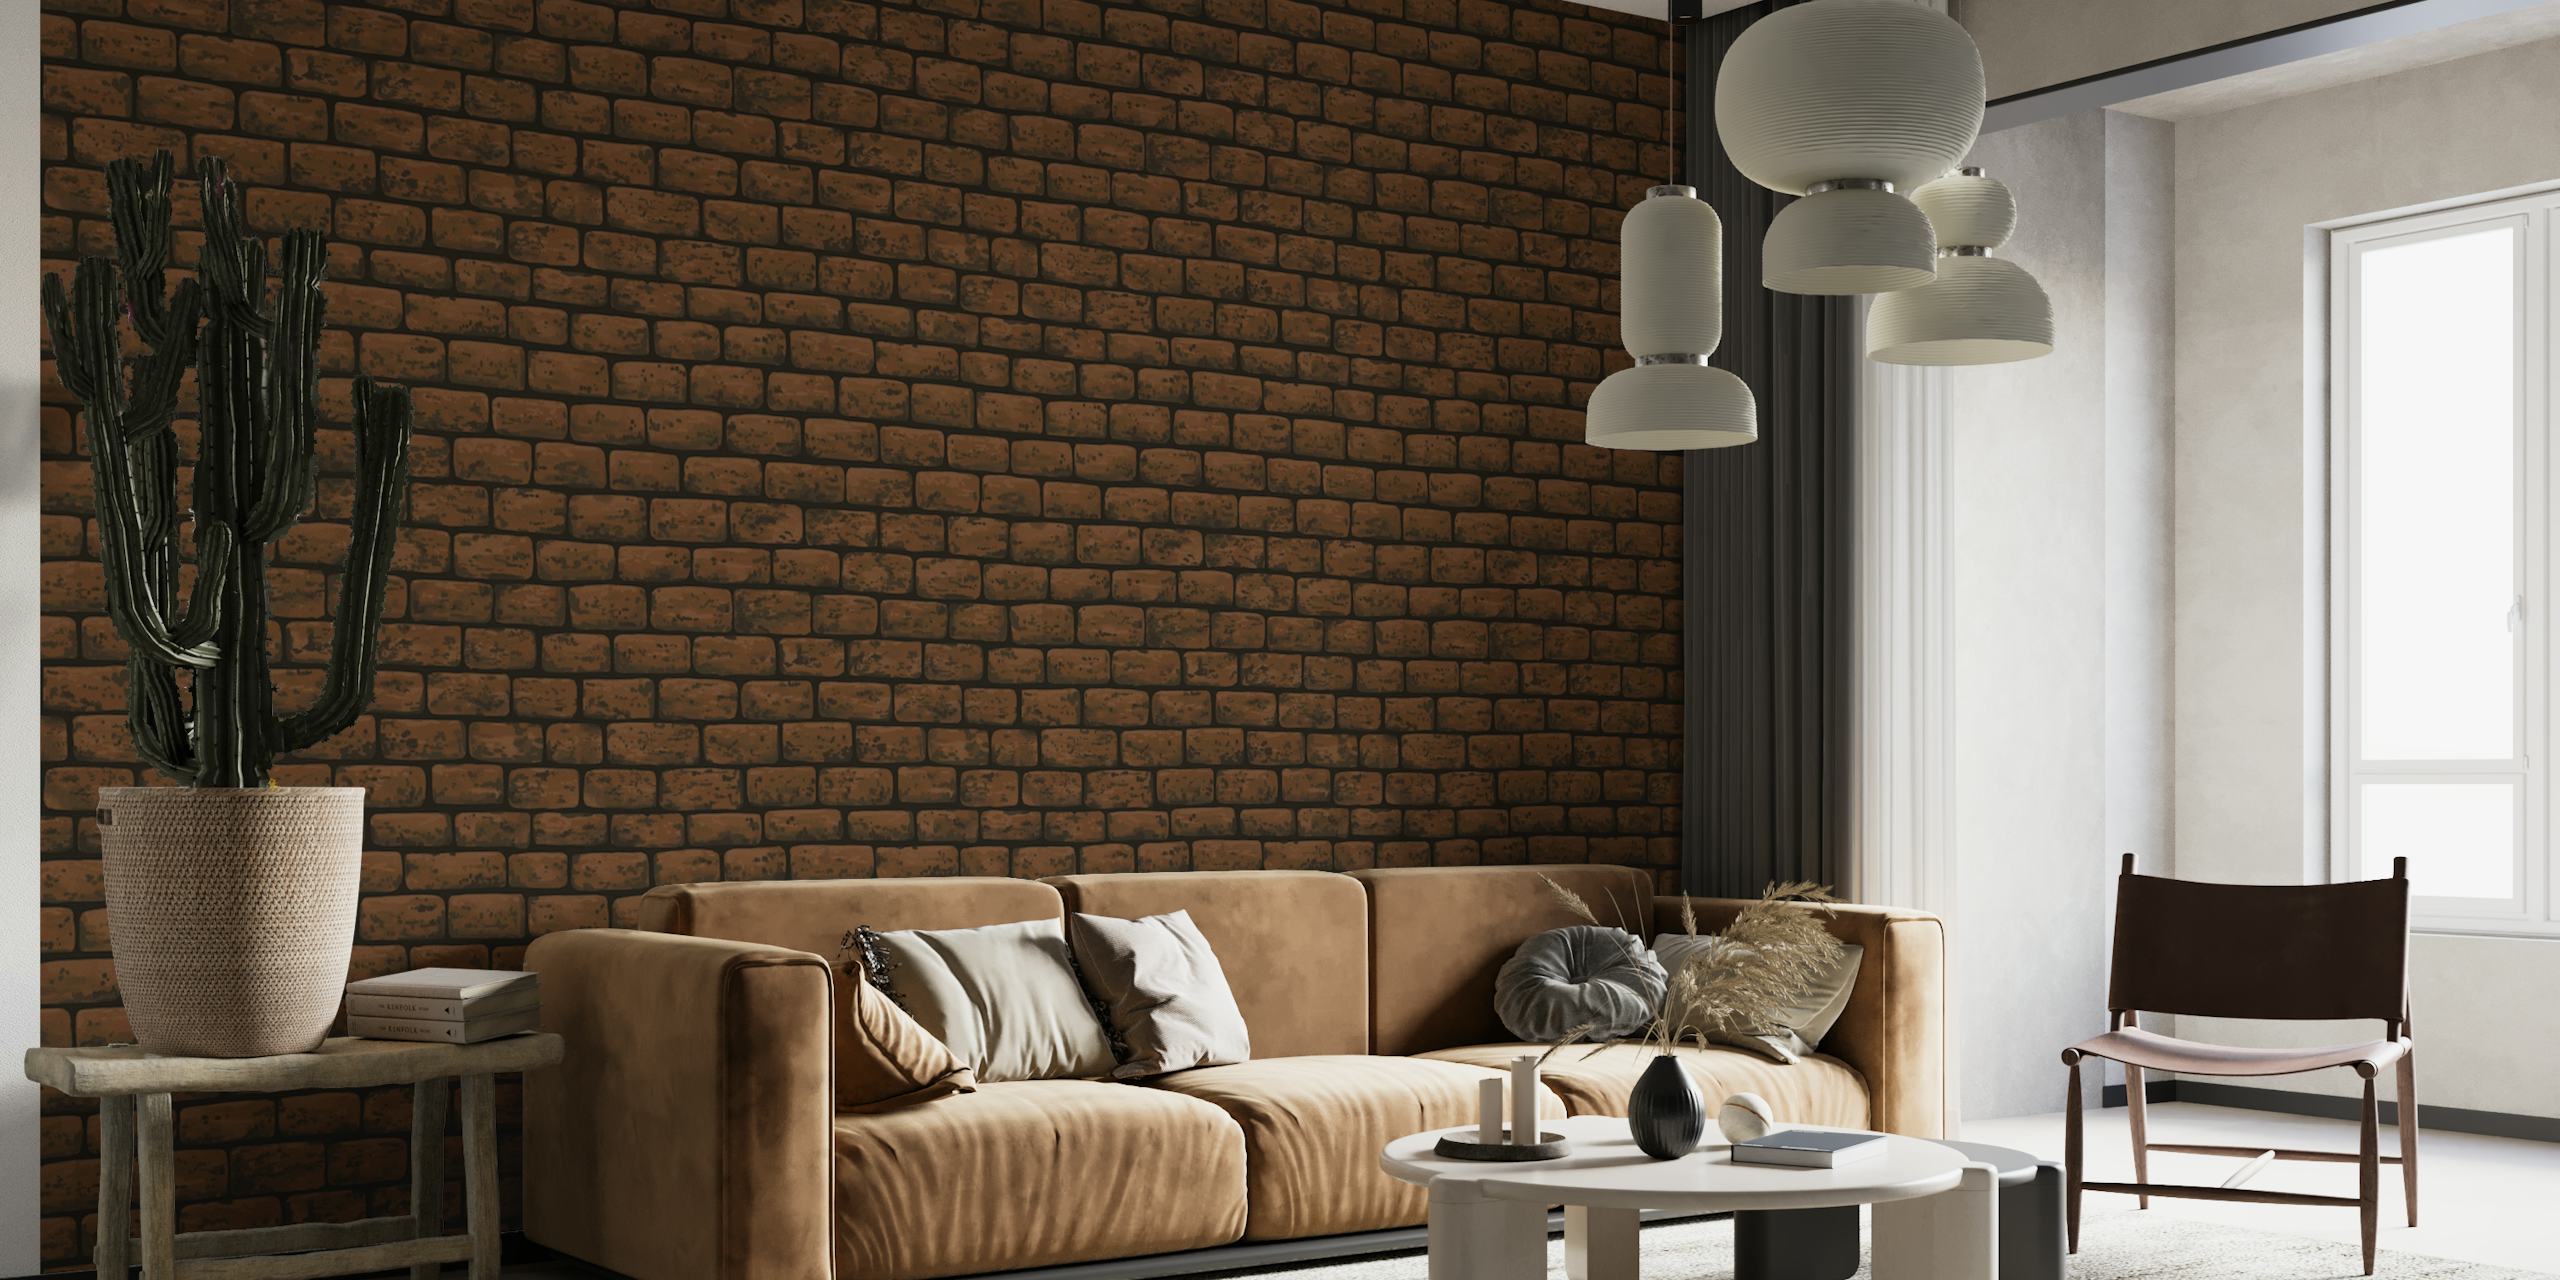 Textured brown brick wall mural for a rustic and industrial interior look